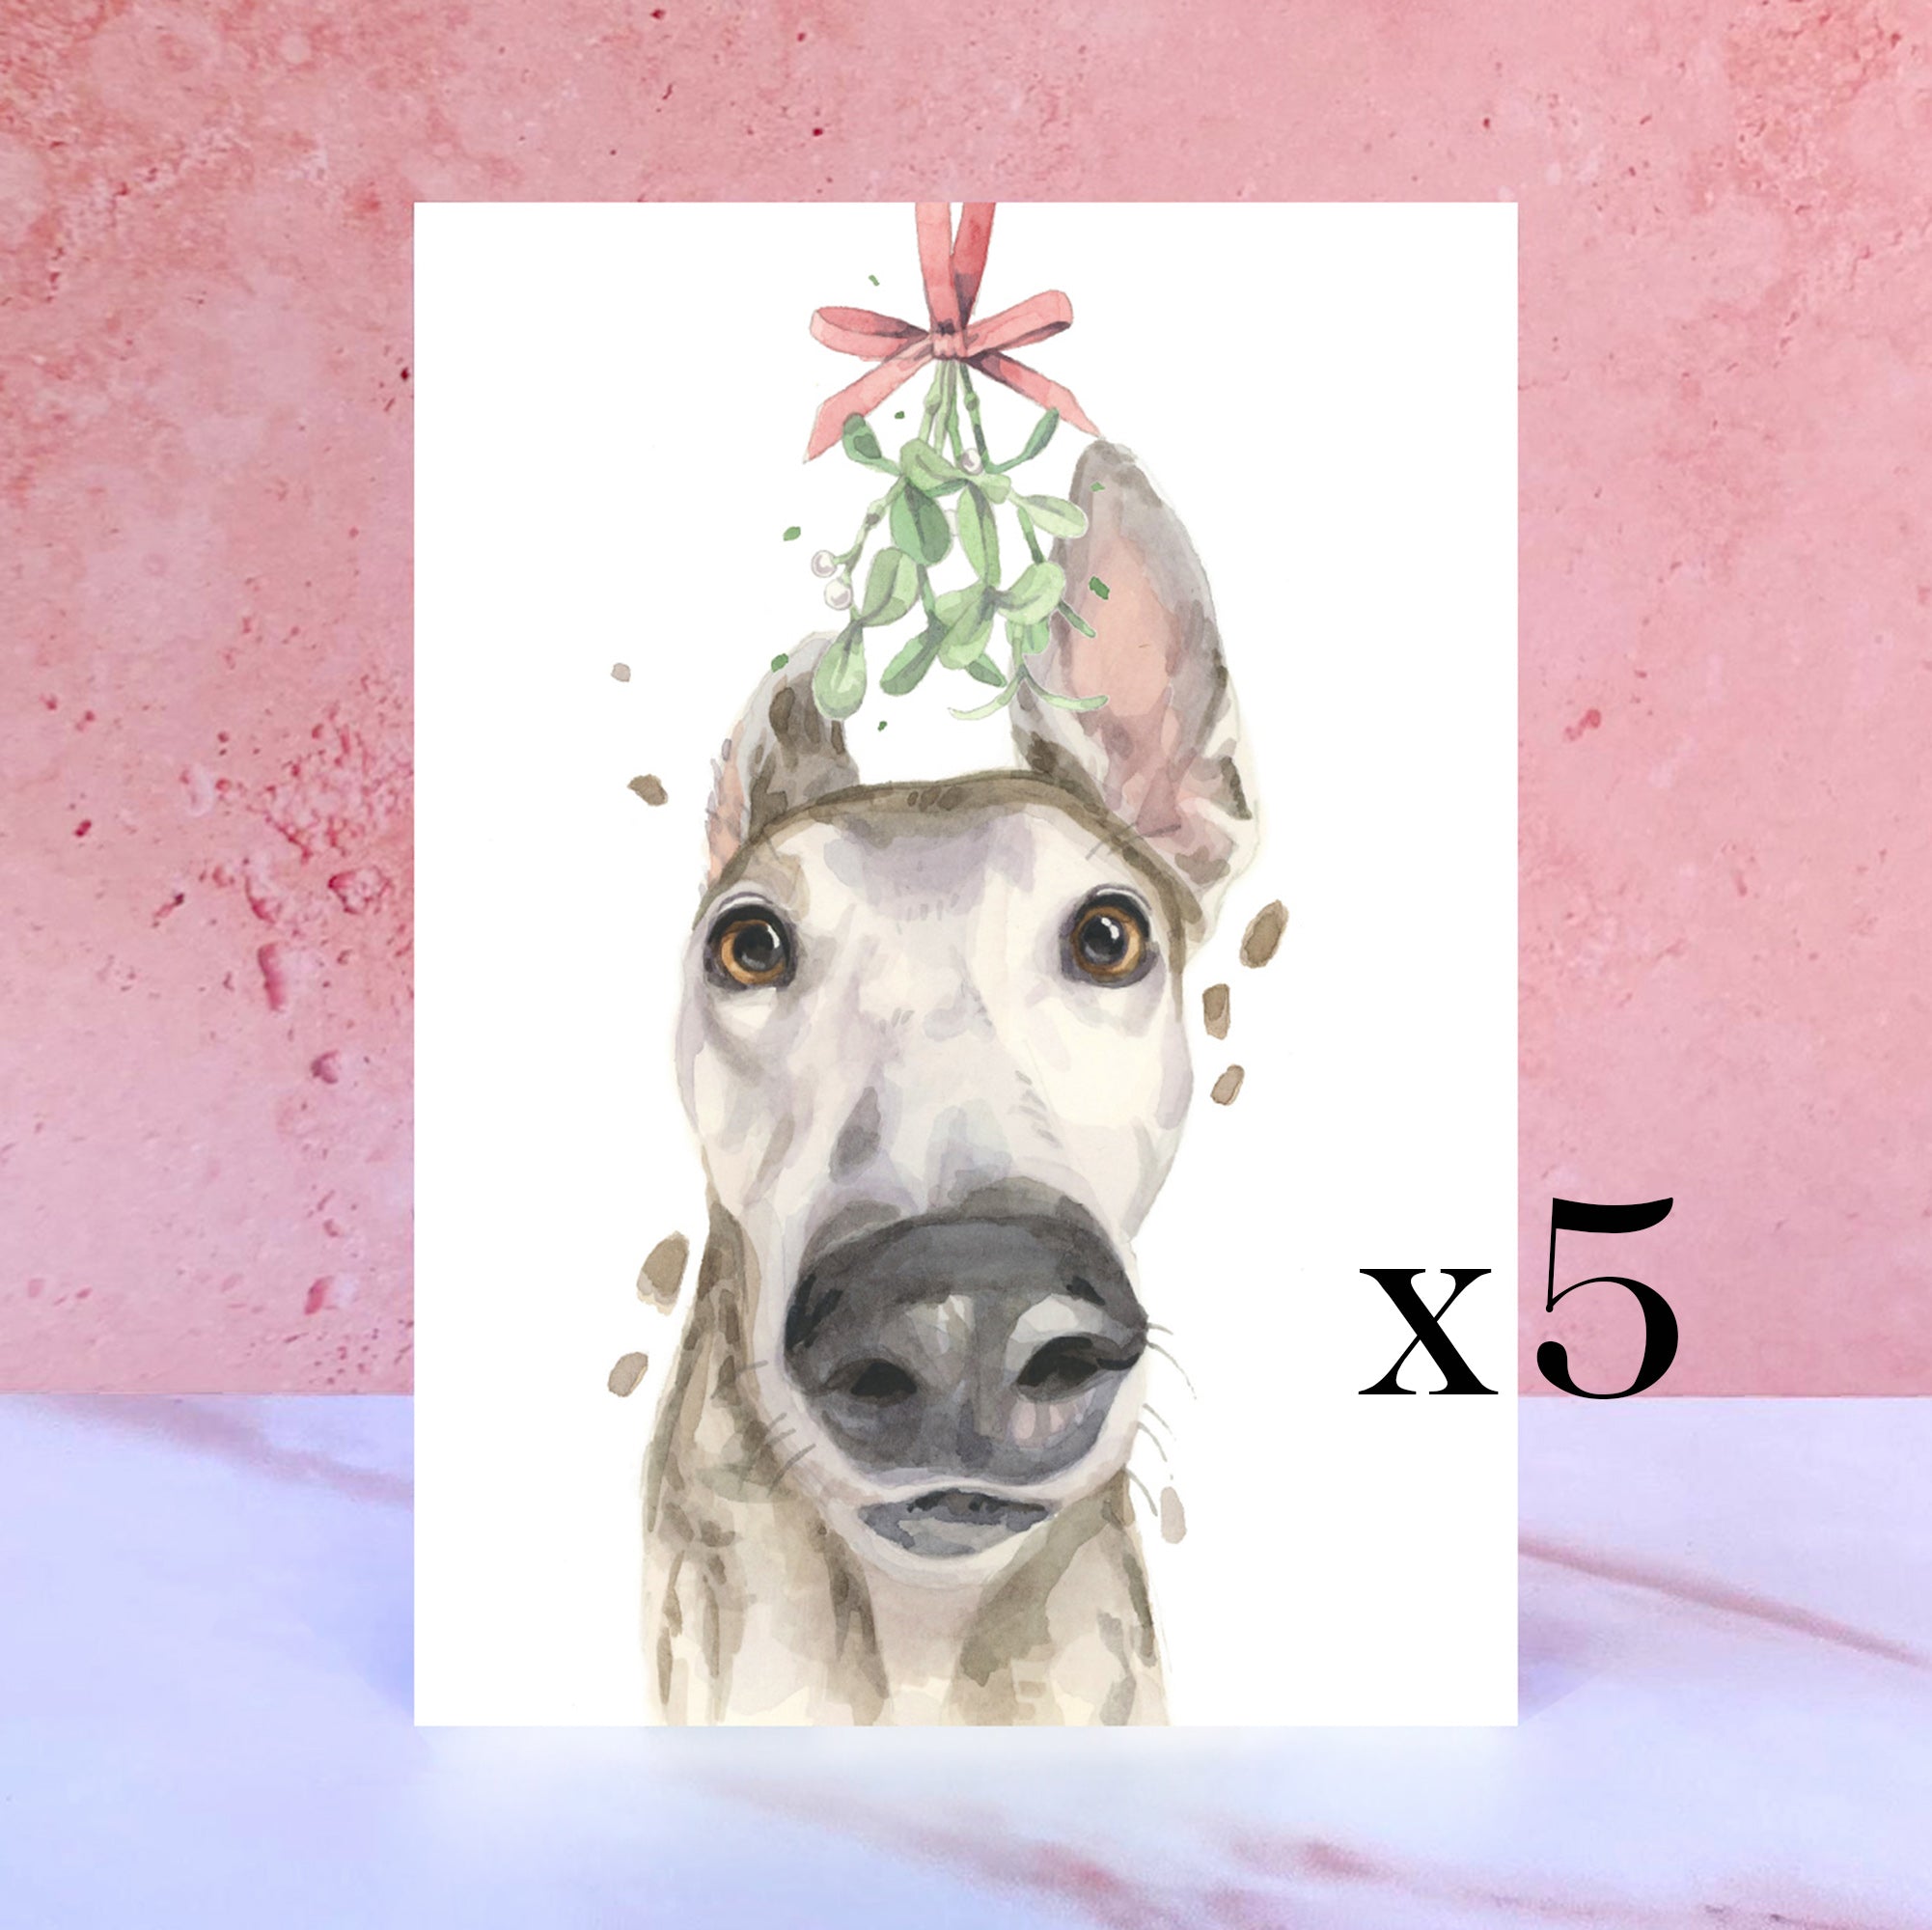 Pack of 5 Greyhound Christmas Card, Lurcher Whipper Holiday Cards